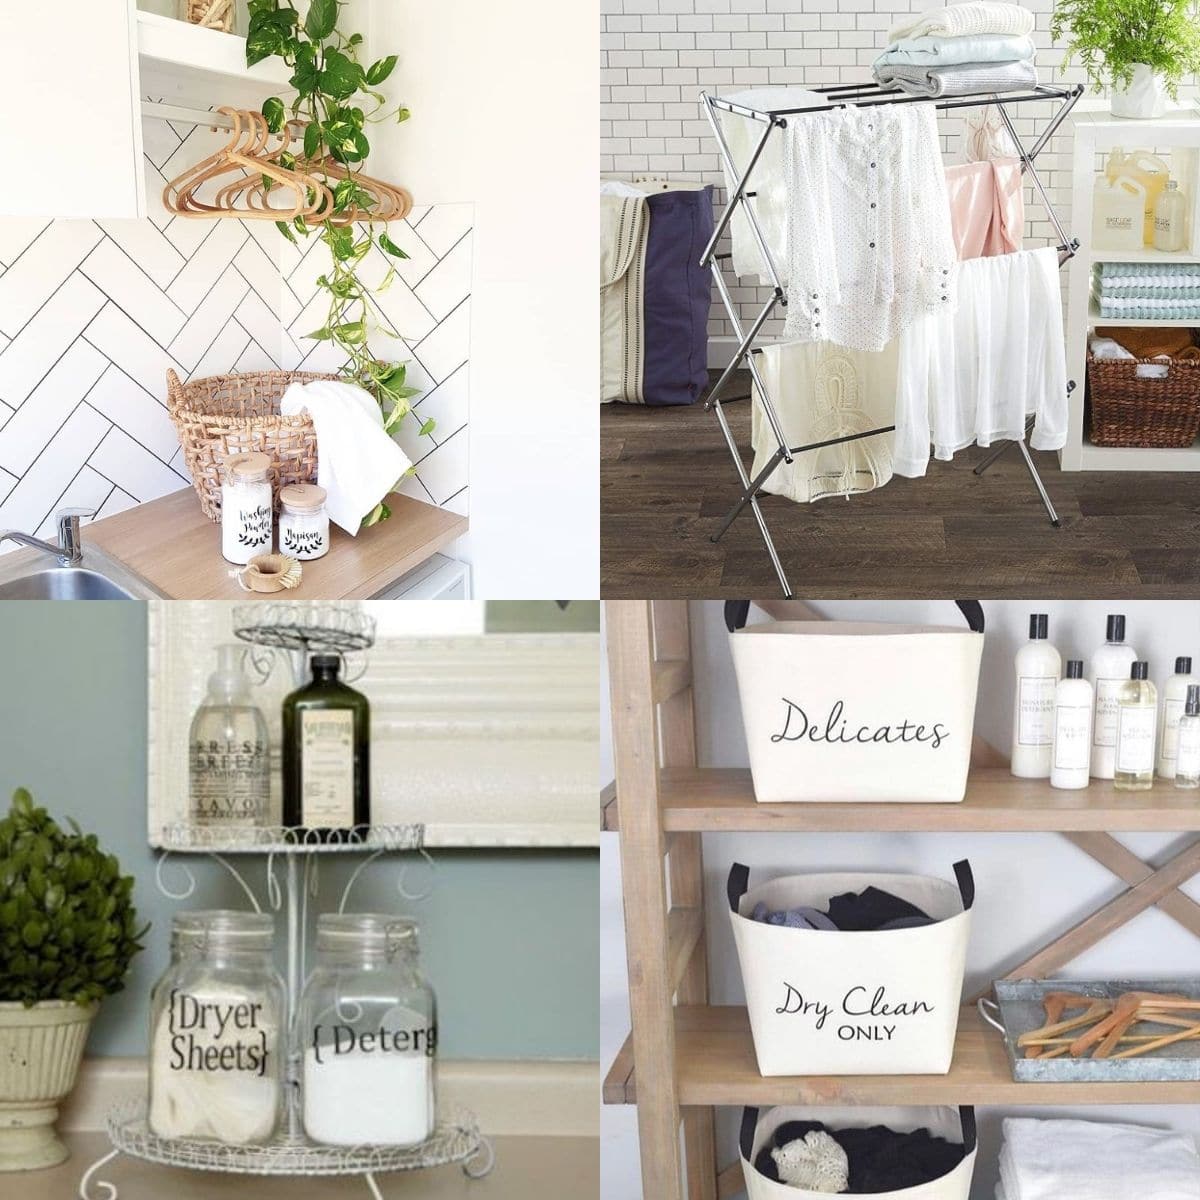 Laundry room can get messy!

Use these storage hacks to keep your laundry room neat and beautiful. 😉

#Storage #StorageIdeas #LaundryRoomStorage #LaundryRoomStorageIdeas

 LocalInfoForYou.com/344942/laundry…